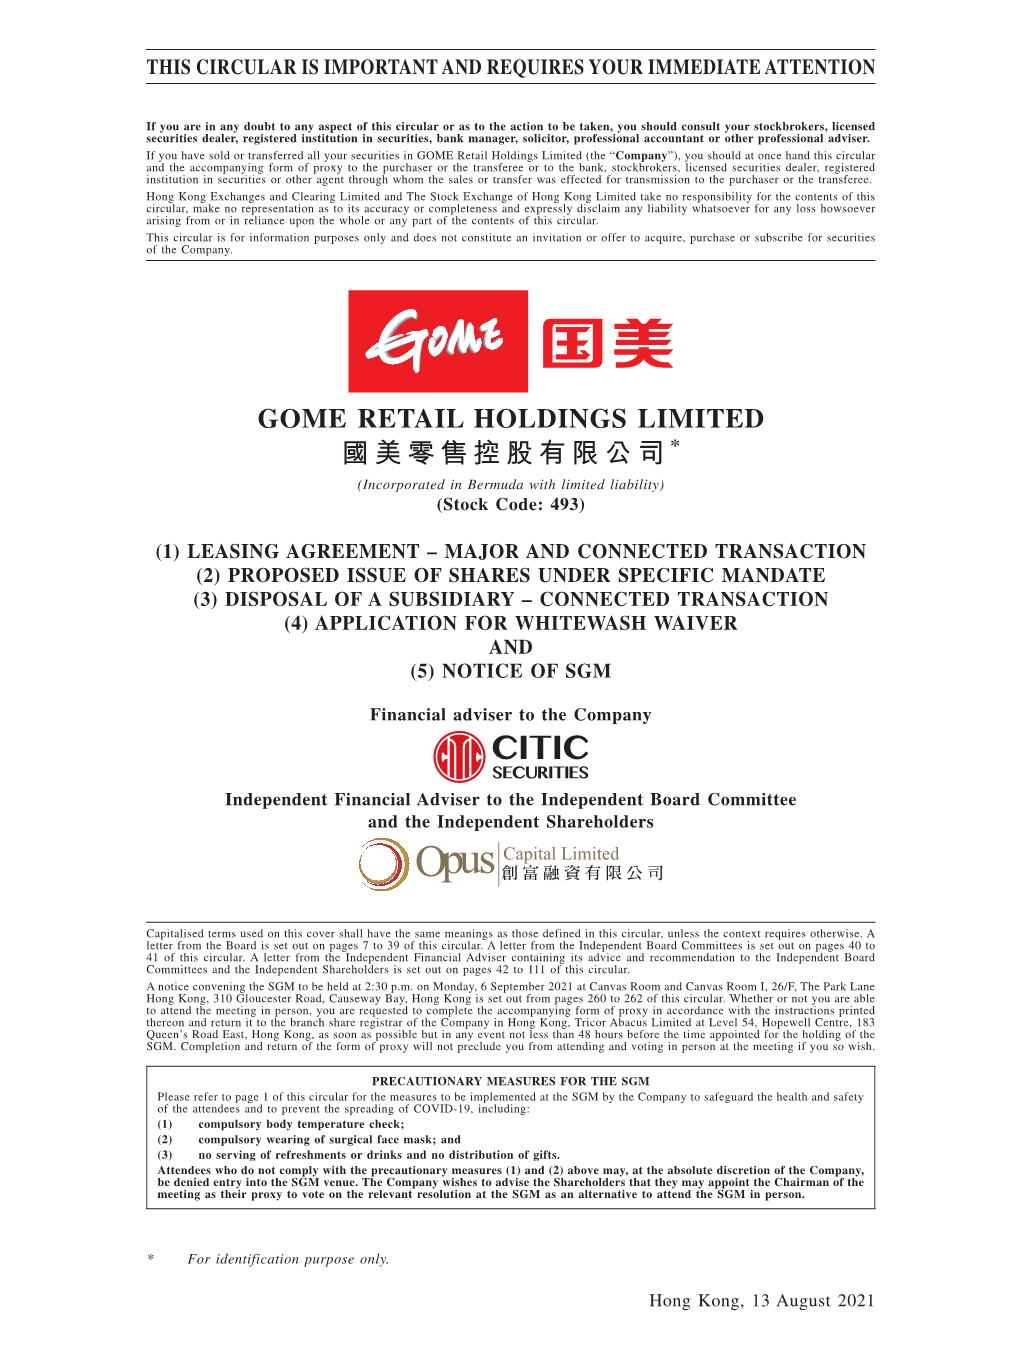 GOME RETAIL HOLDINGS LIMITED 國美零售控股有限公司* (Incorporated in Bermuda with Limited Liability) (Stock Code: 493)